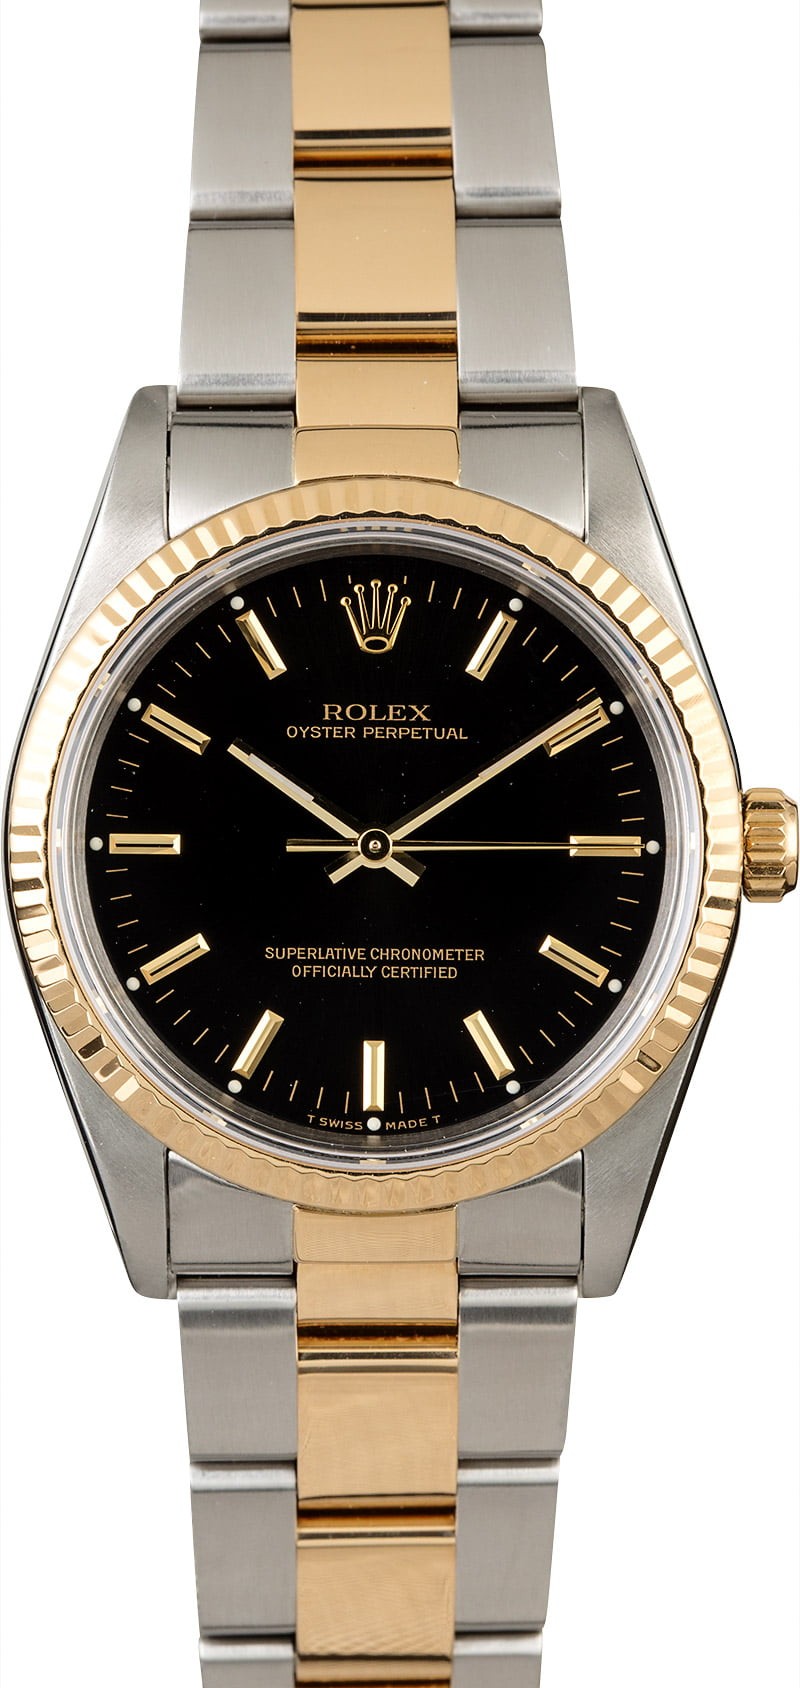 Rolex Oyster Perpetual 14233 Black Dial WE00369